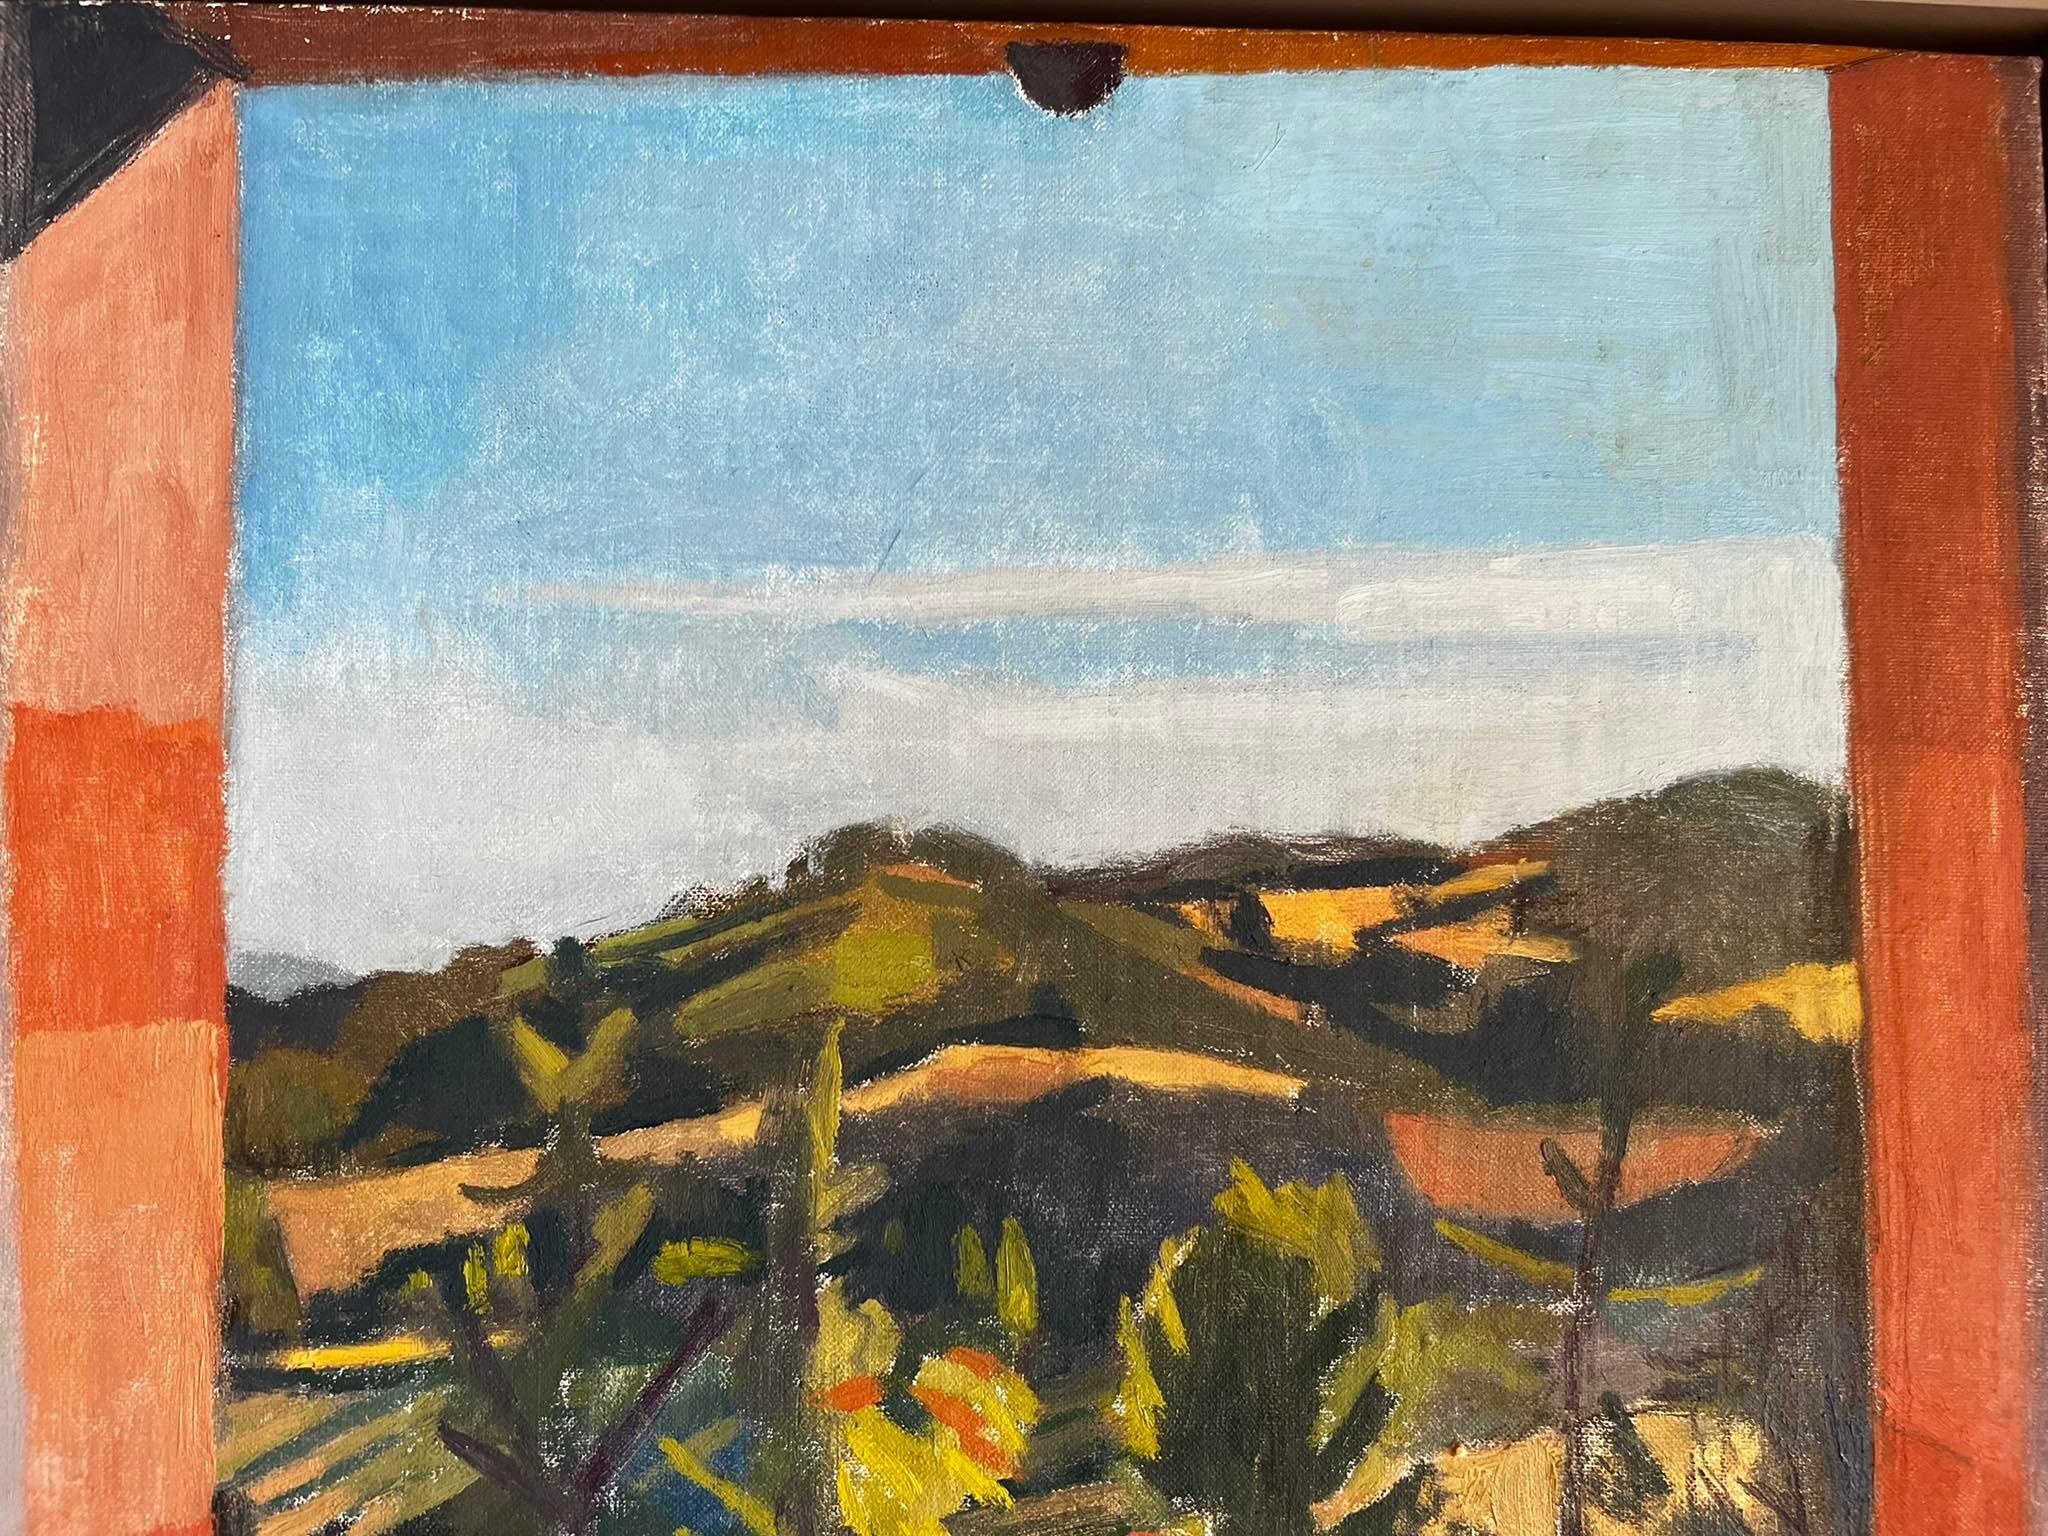 This oil on canvas painting is of a captivating Italian vista, located in the northwest of Italy, with plant life and fields. The expansive, rolling hills are breathtakingly beautiful. The various shades of greens, rich terra cotta reds, and the